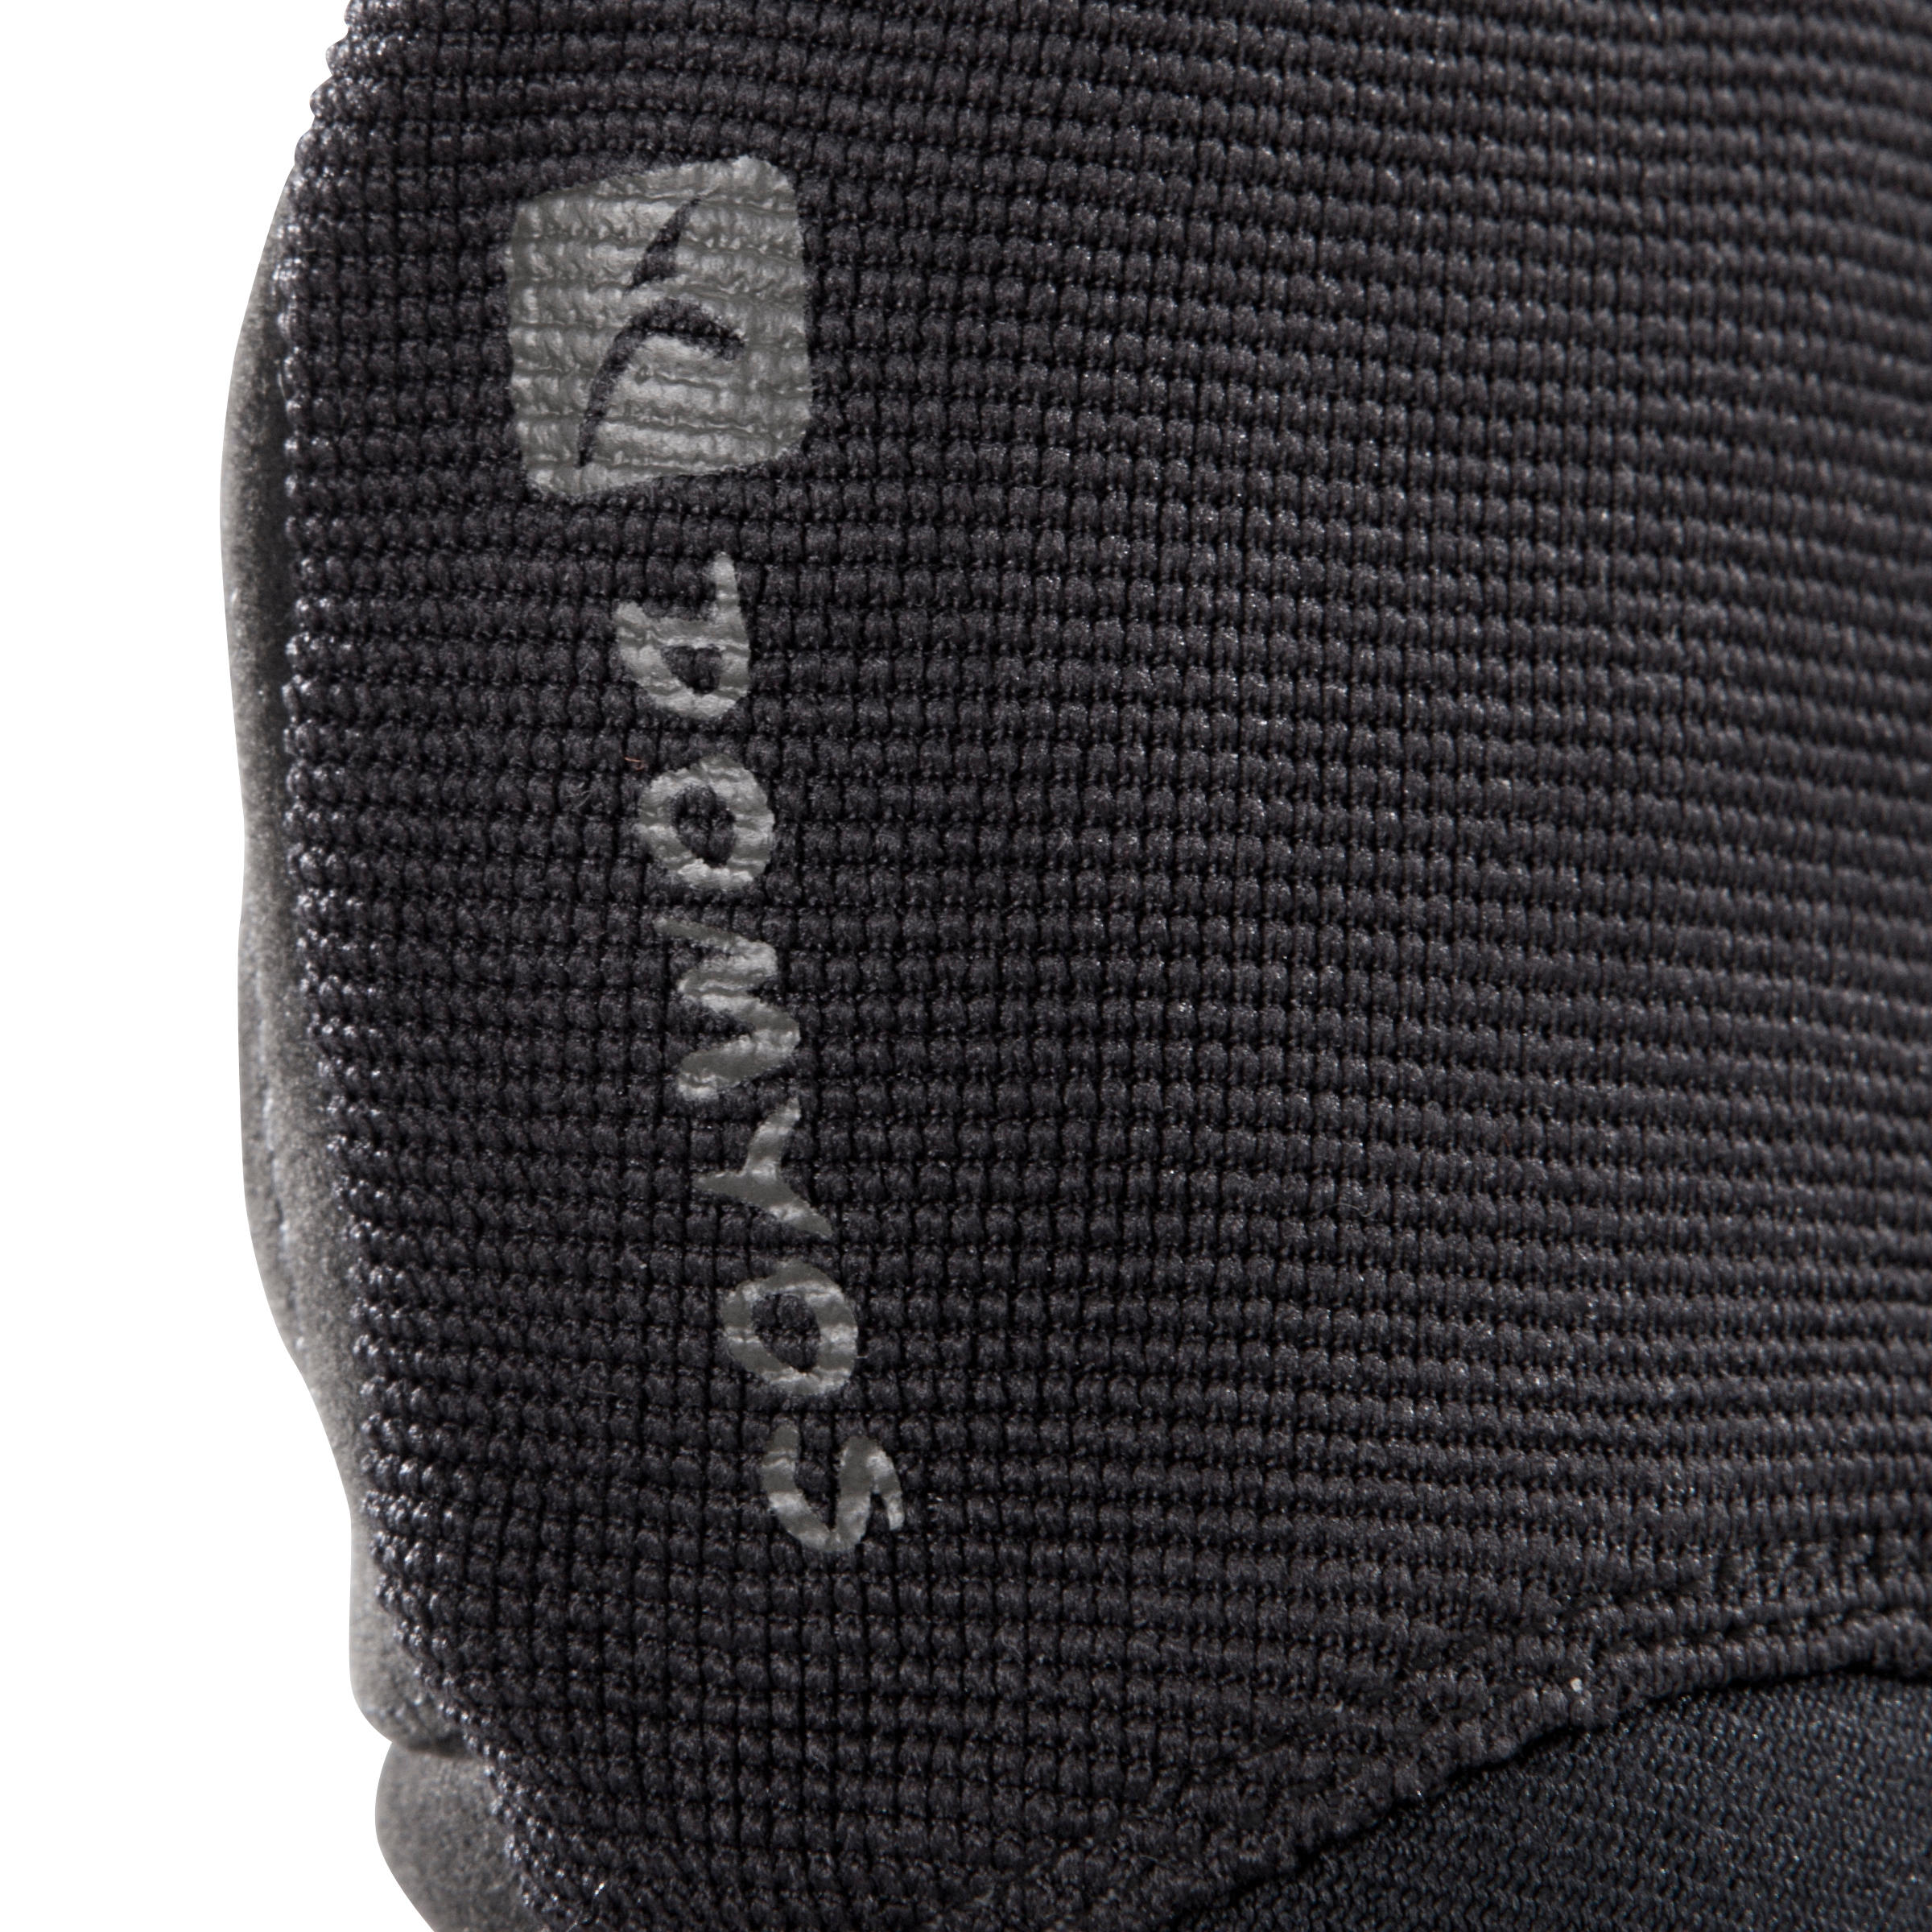 900 Weight Training Glove with Double Rip-Tab Cuff - Black/Grey 9/10